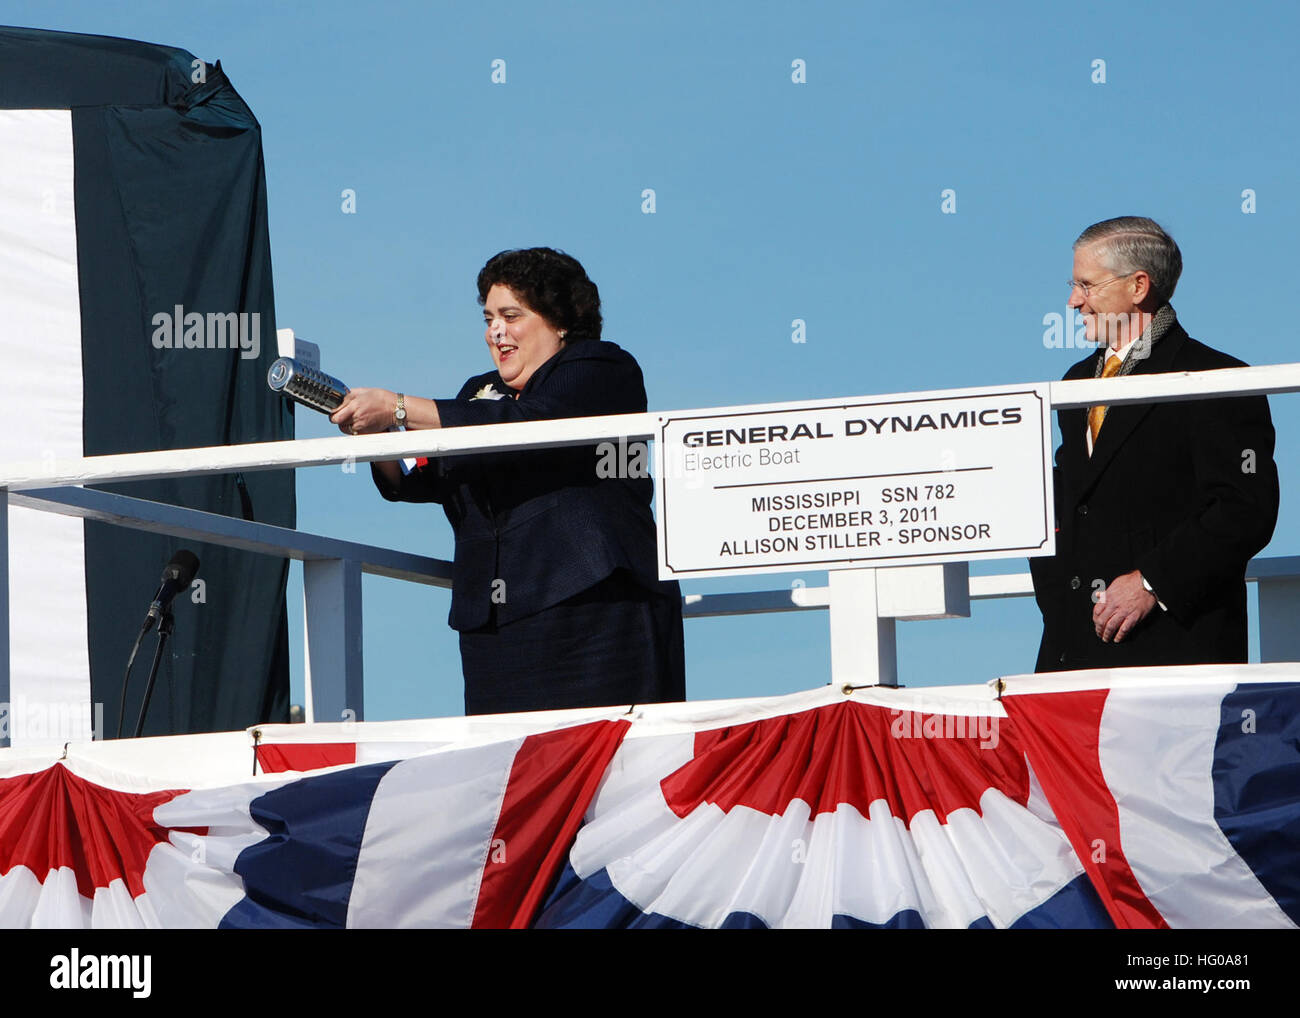 111203-N-AW324-148 GROTON, Conn. (Dec. 3, 2011) Ship sponsor Allison Stiller, left, prepares to christen the Virginia-class attack submarine Pre-Commissioning Unit (PCU) Mississippi (SSN 782) as John Casey, president of General Dynamics Electric Boat, looks on during a christening ceremony in Groton, Conn. Mississippi is the ninth Virginia-class submarine and the fifth U.S. Navy ship to be named for the Magnolia State. (U.S. Navy photo by Mass Communication Specialist 1st Class Virginia K. Schaefer/Released) US Navy 111203-N-AW324-148 Ship sponsor Allison Stiller, left, prepares to christen th Stock Photo